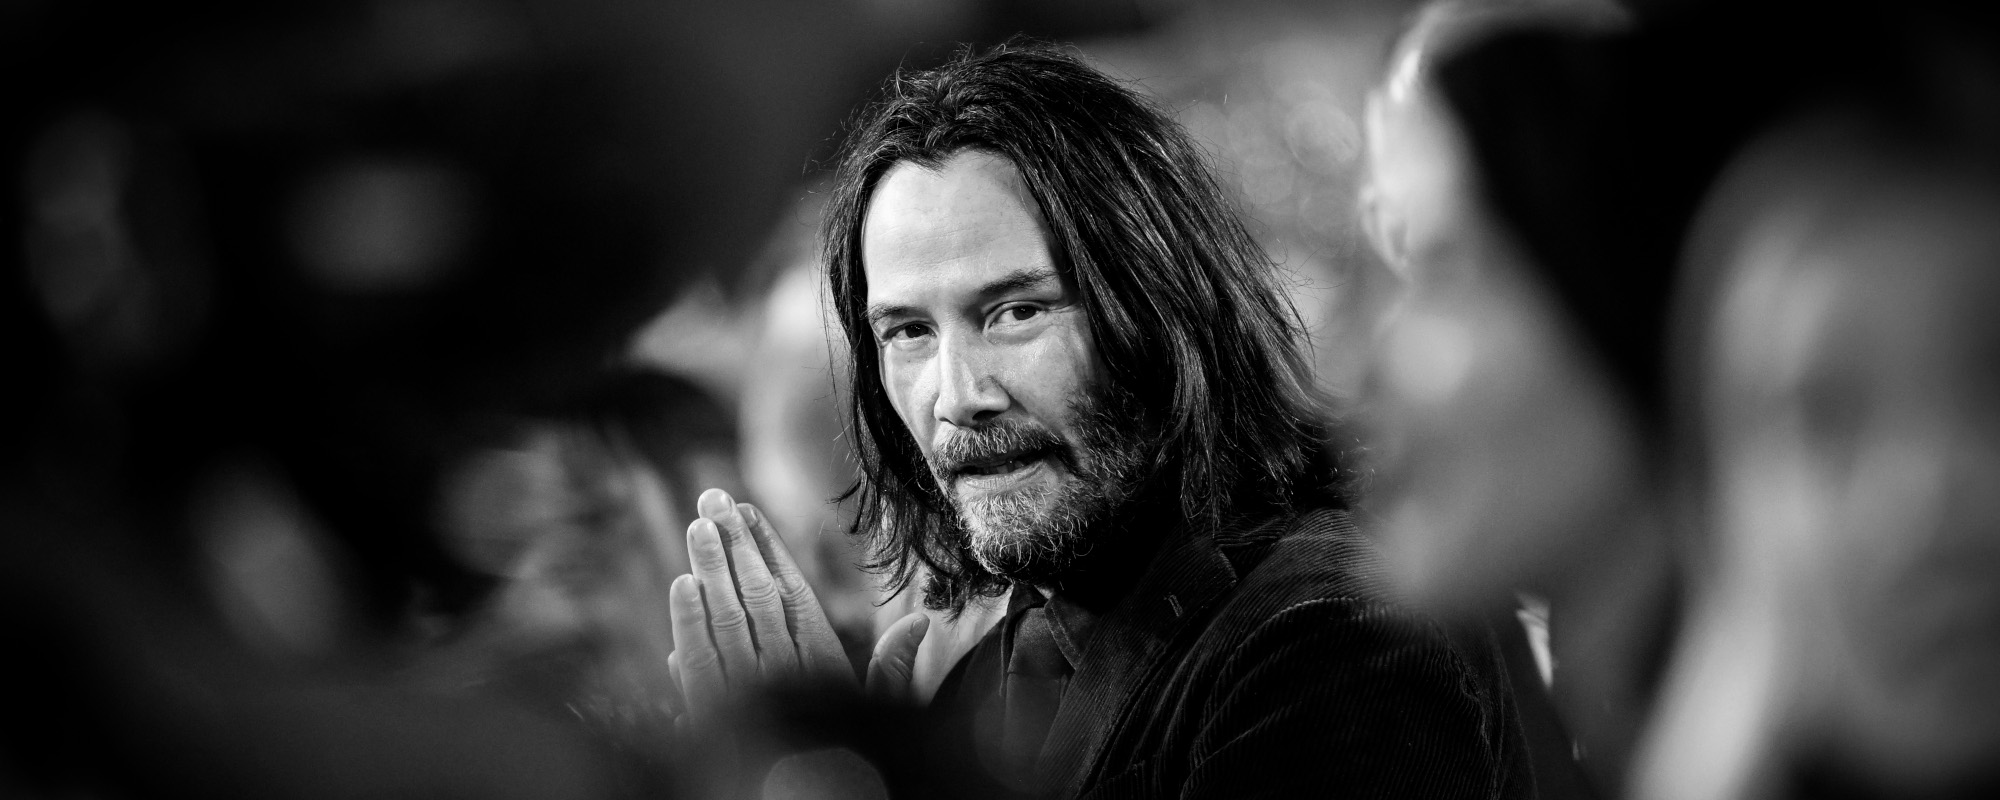 Keanu Reeves Teases First New Music in More Than 20 Years with Band, Dogstar